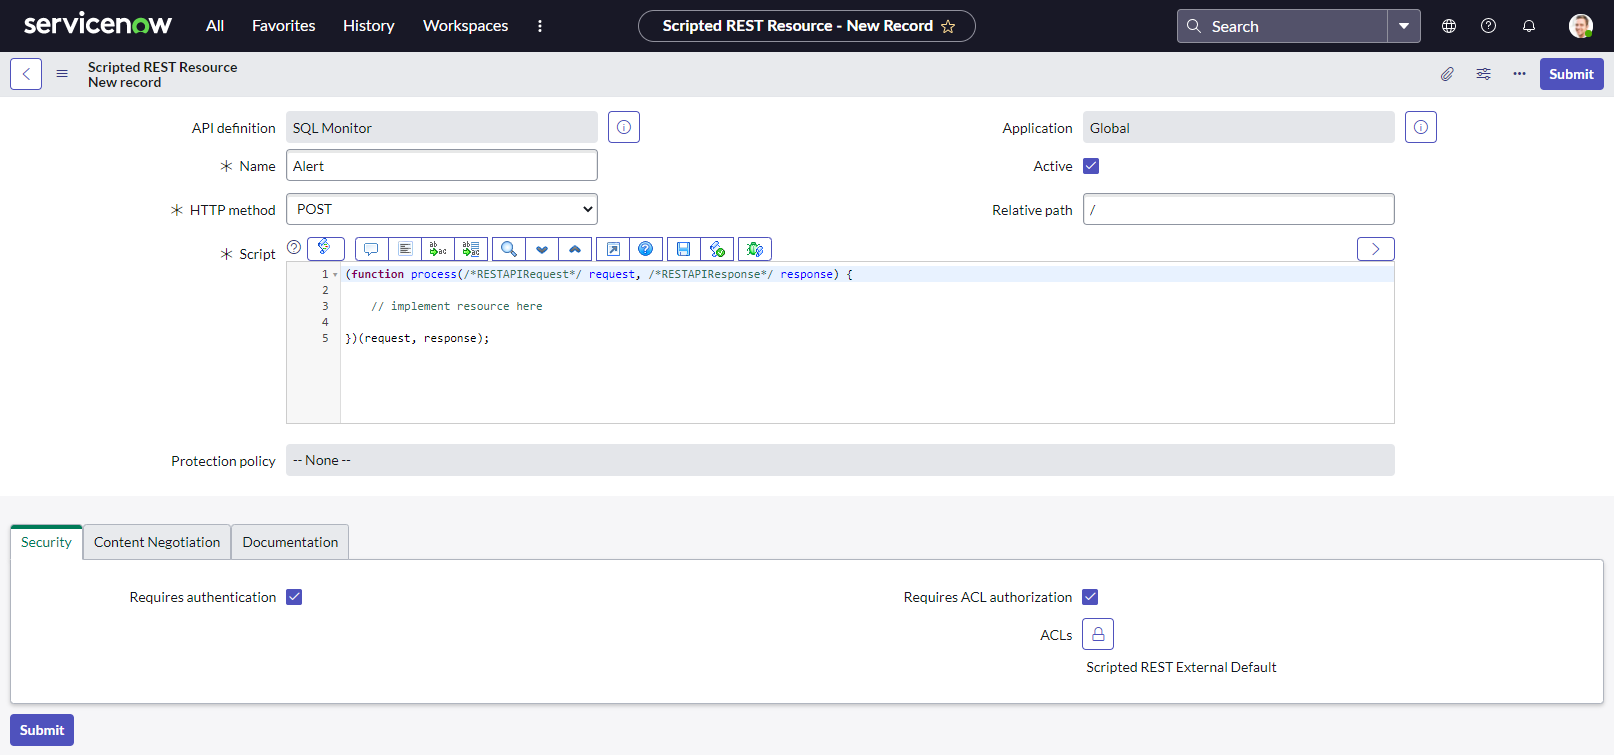 Screenshot of ServiceNow showing details of a new Scripted REST API resource, with fields for defining the name, HTTP method, and script